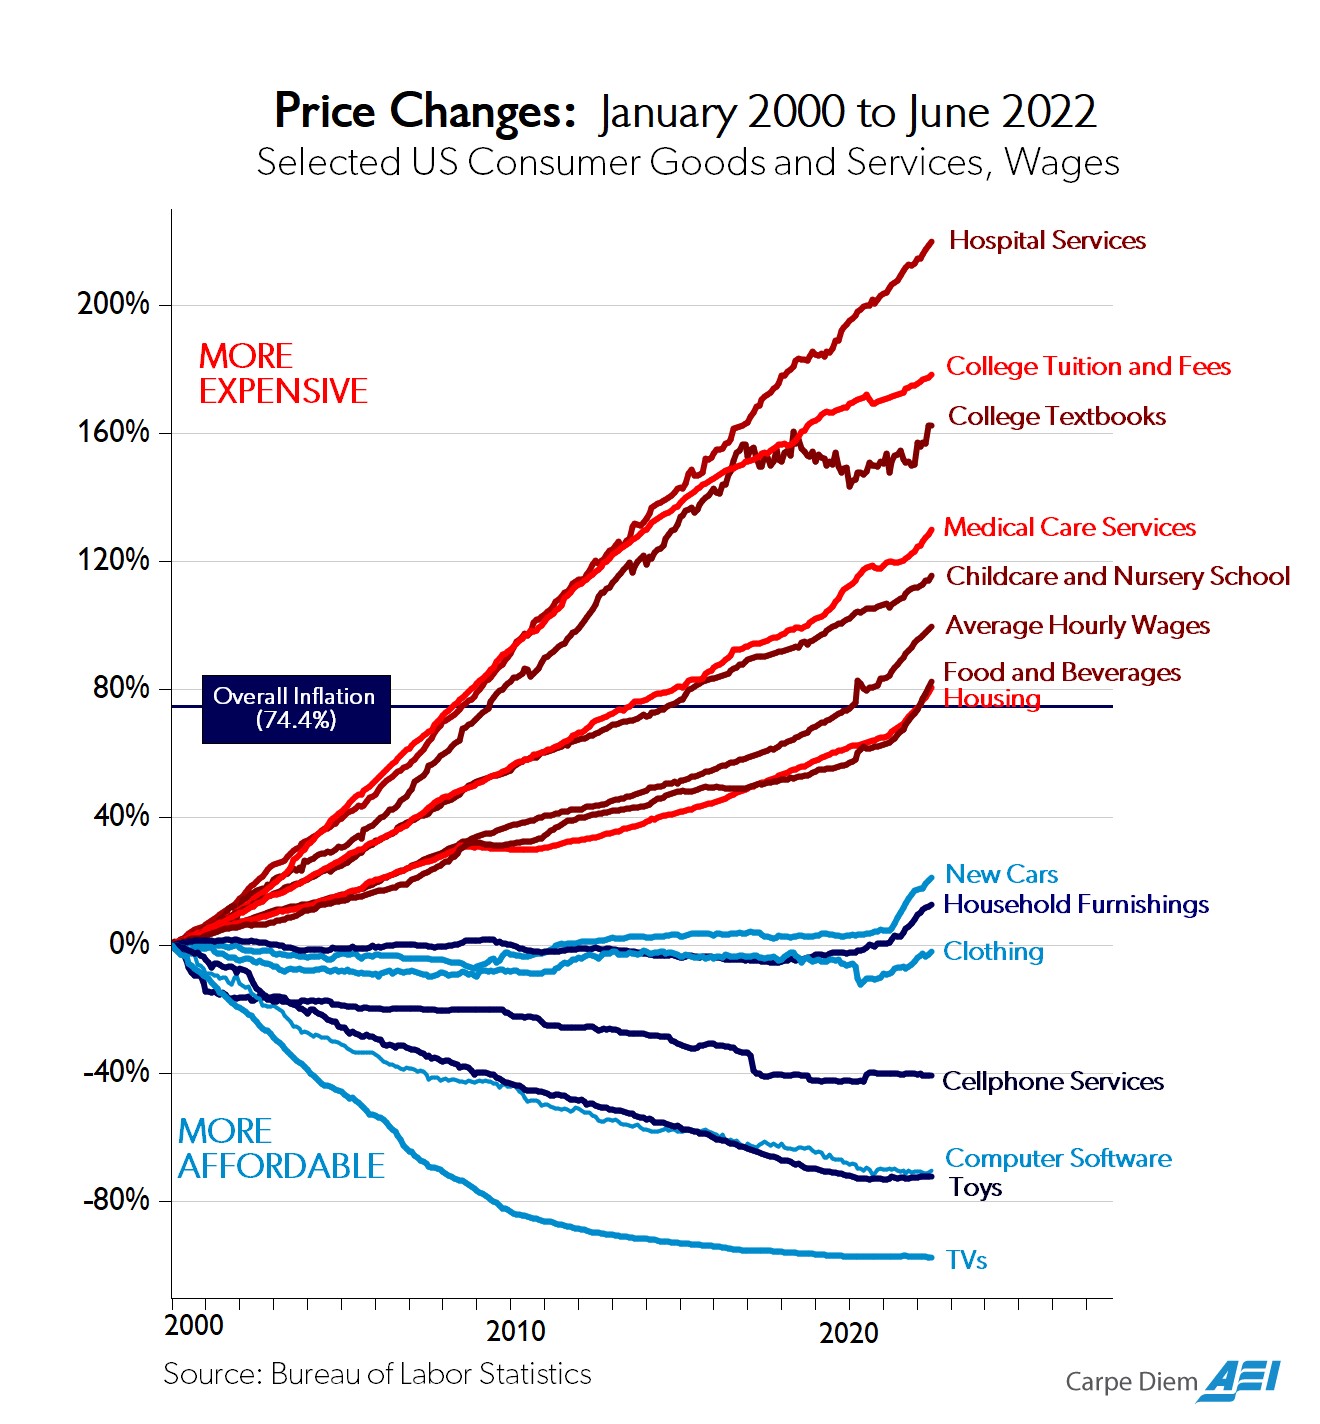 chart shows various products price changes from January 2000- June 2022